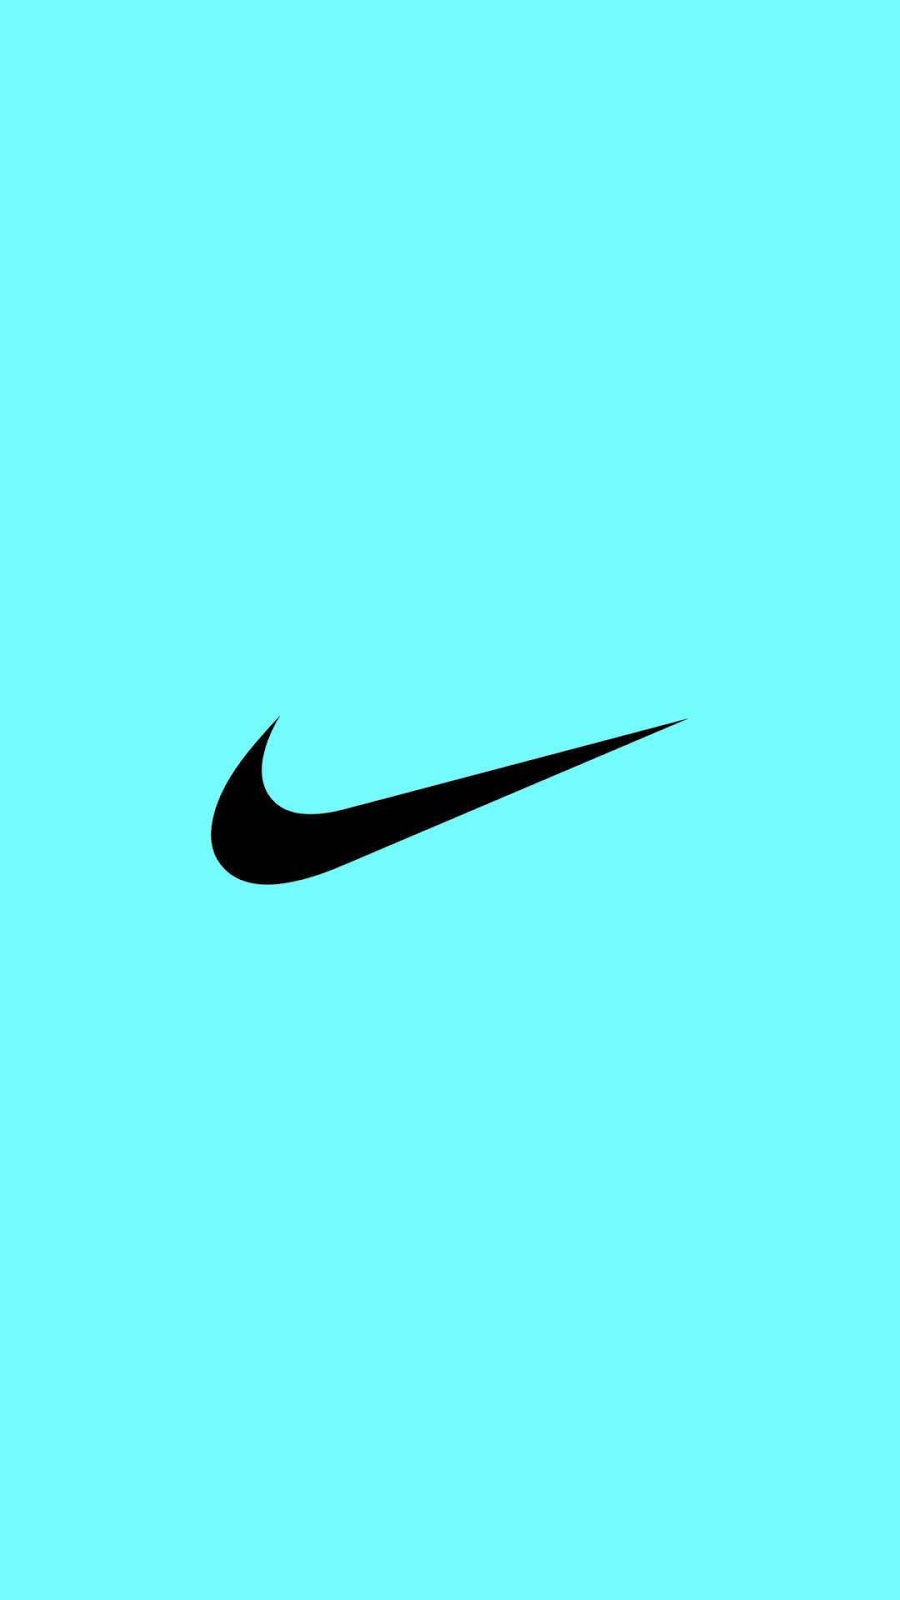 Nike Logo HD Wallpapers For Iphone X, Iphone XR,Iphone 11, Etc - Safelink